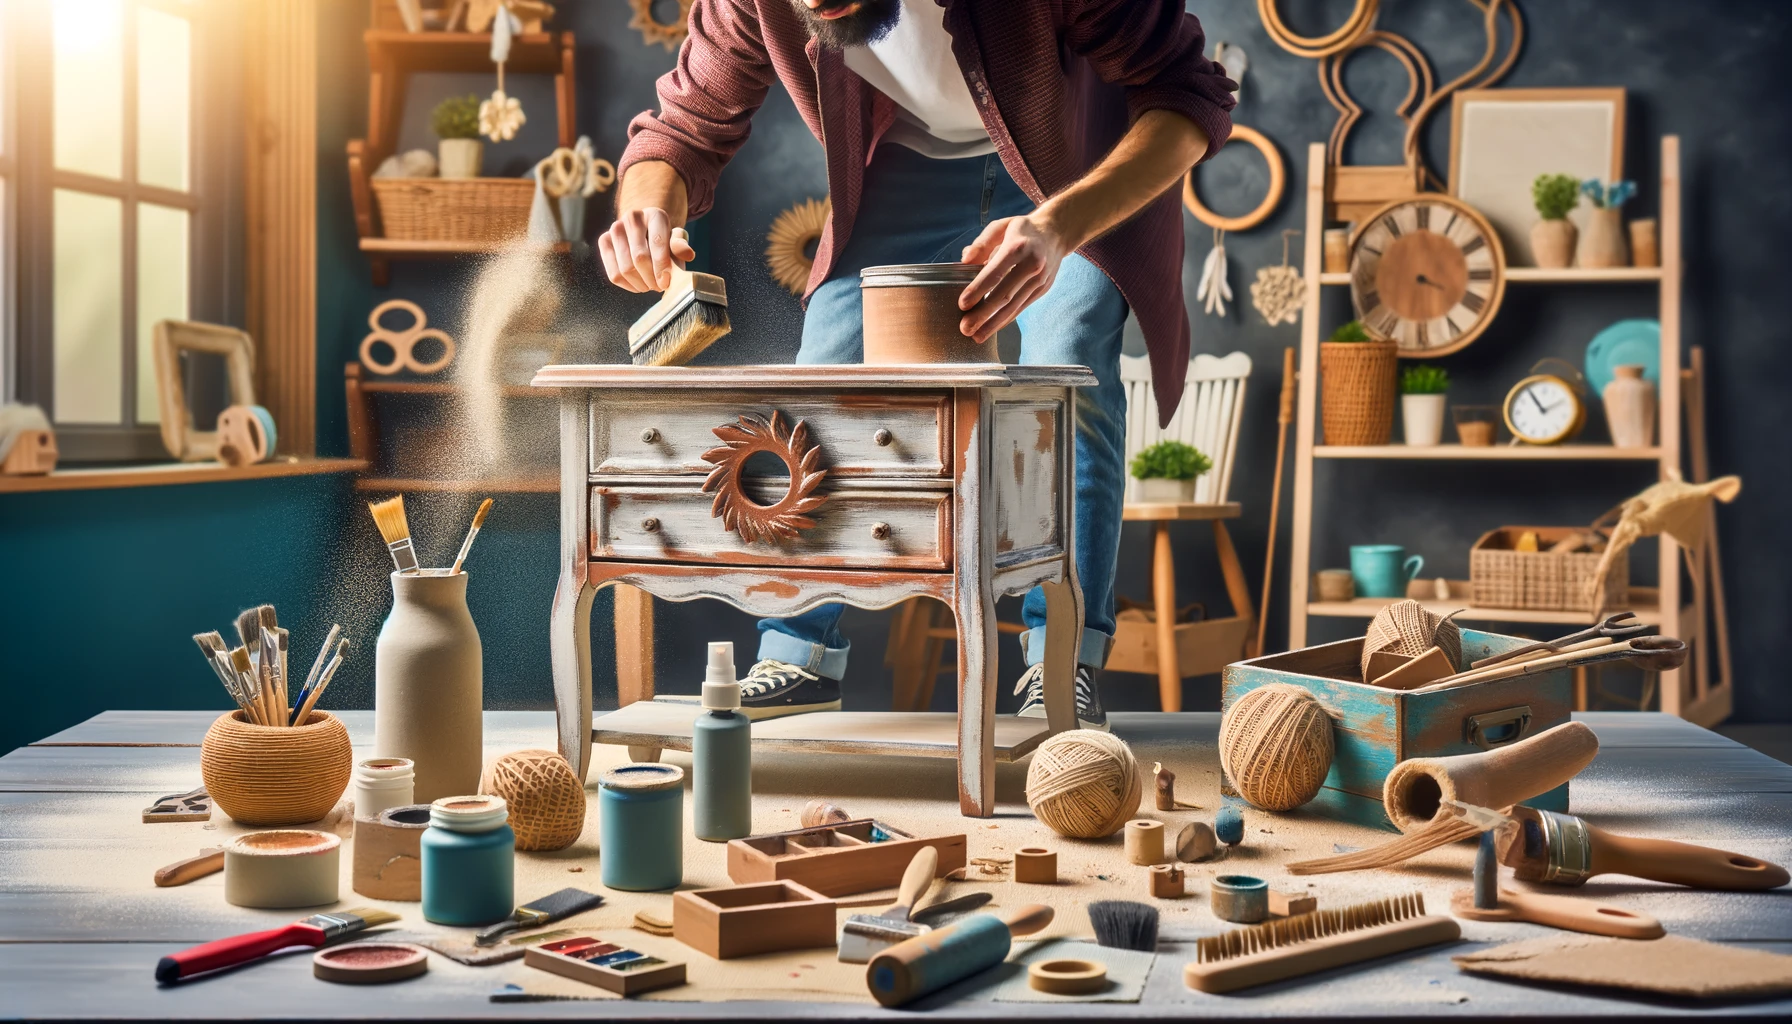 Unlock the art of upcycling with our guide to transforming everyday waste into creative and functional treasures. Dive into projects that benefit the planet and your space.